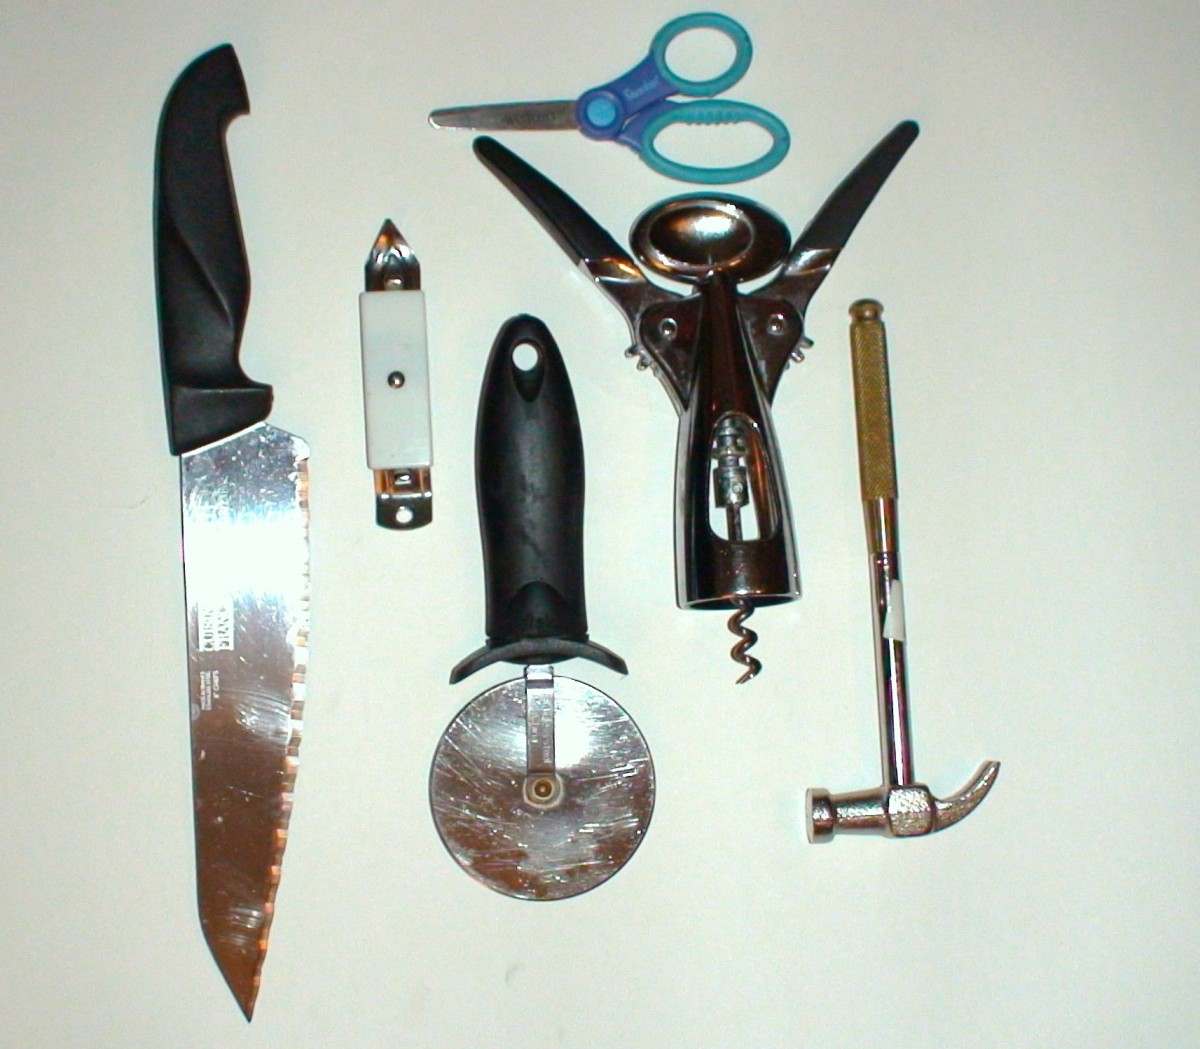 Scissors, bottle openers, and hammers are levers. Pizza cutters and knives are wedges. The Corkscrew is a screw. All are everyday examples of simple machines. 